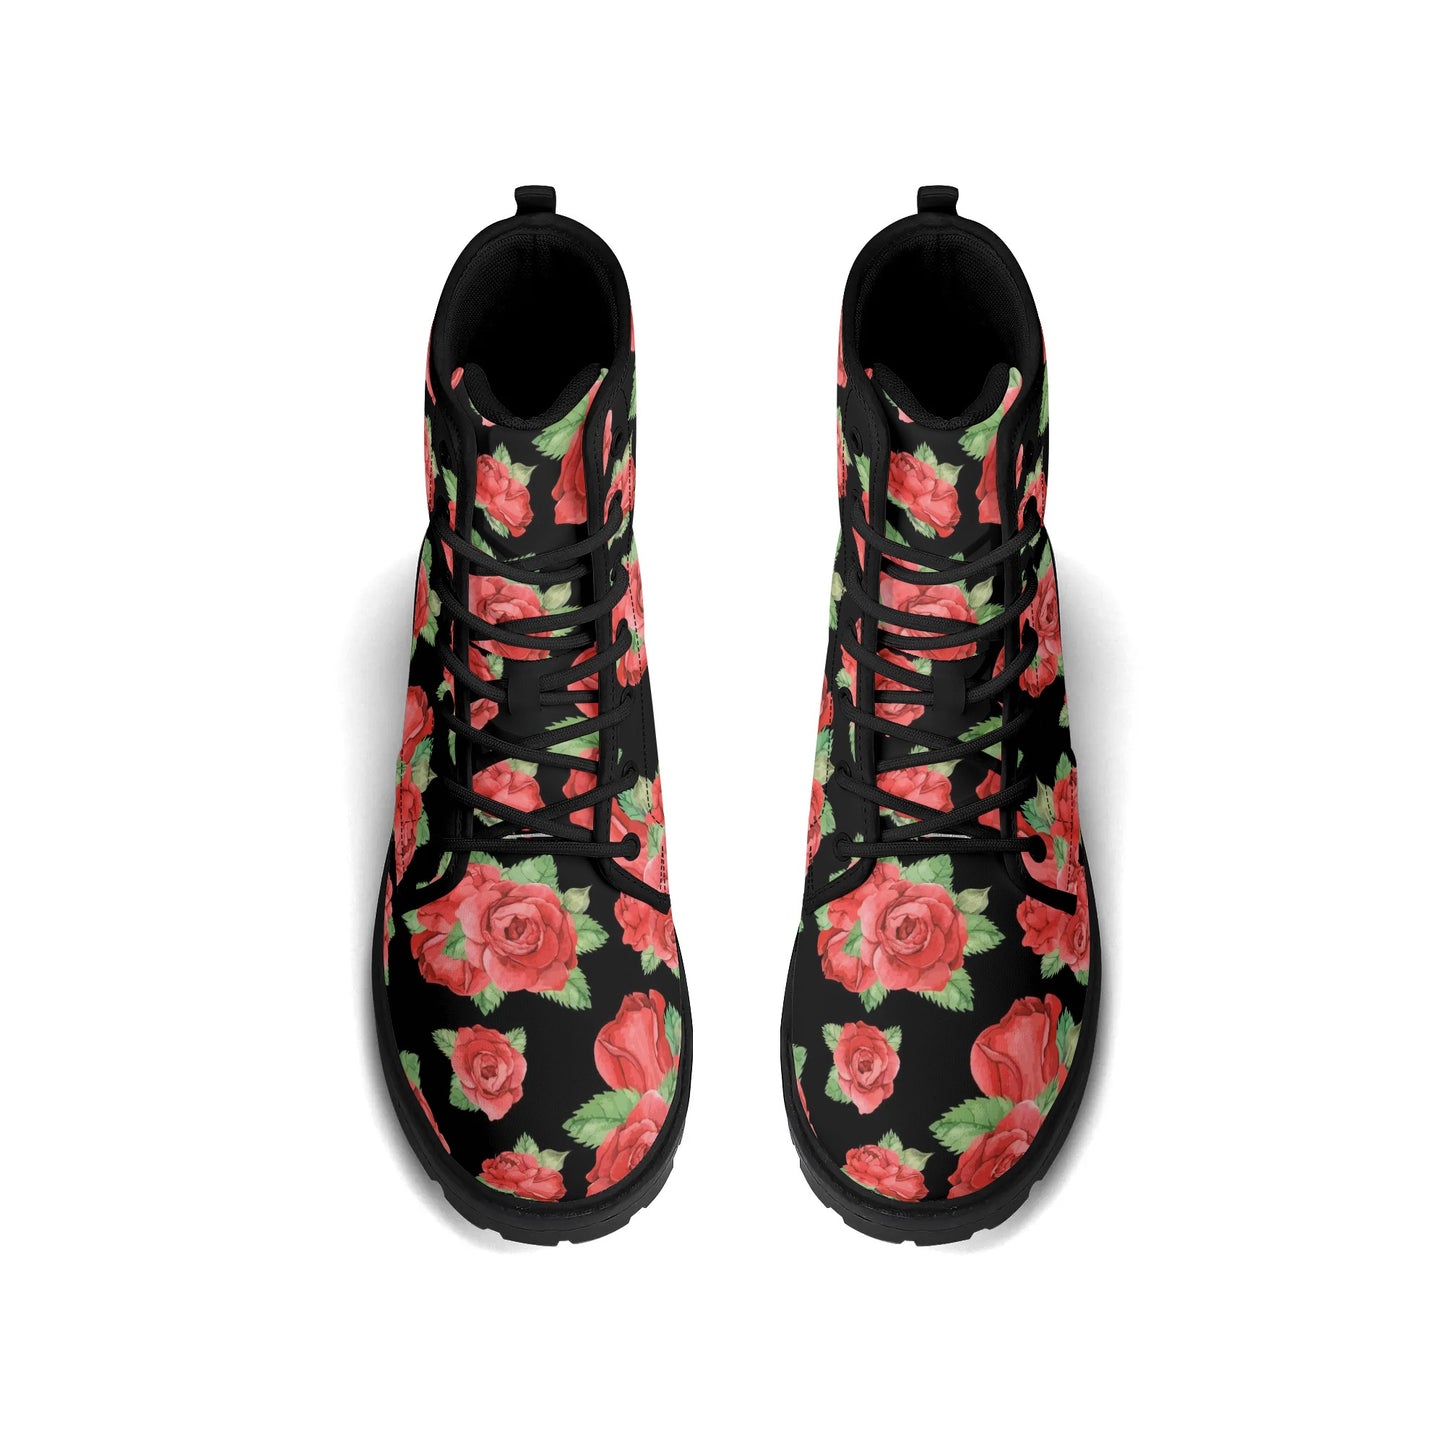 Leather Boots with Roses Women, Red Floral Flowers Lace Up Shoes Hiking Festival Black Ankle Combat Work Winter Casual Waterproof